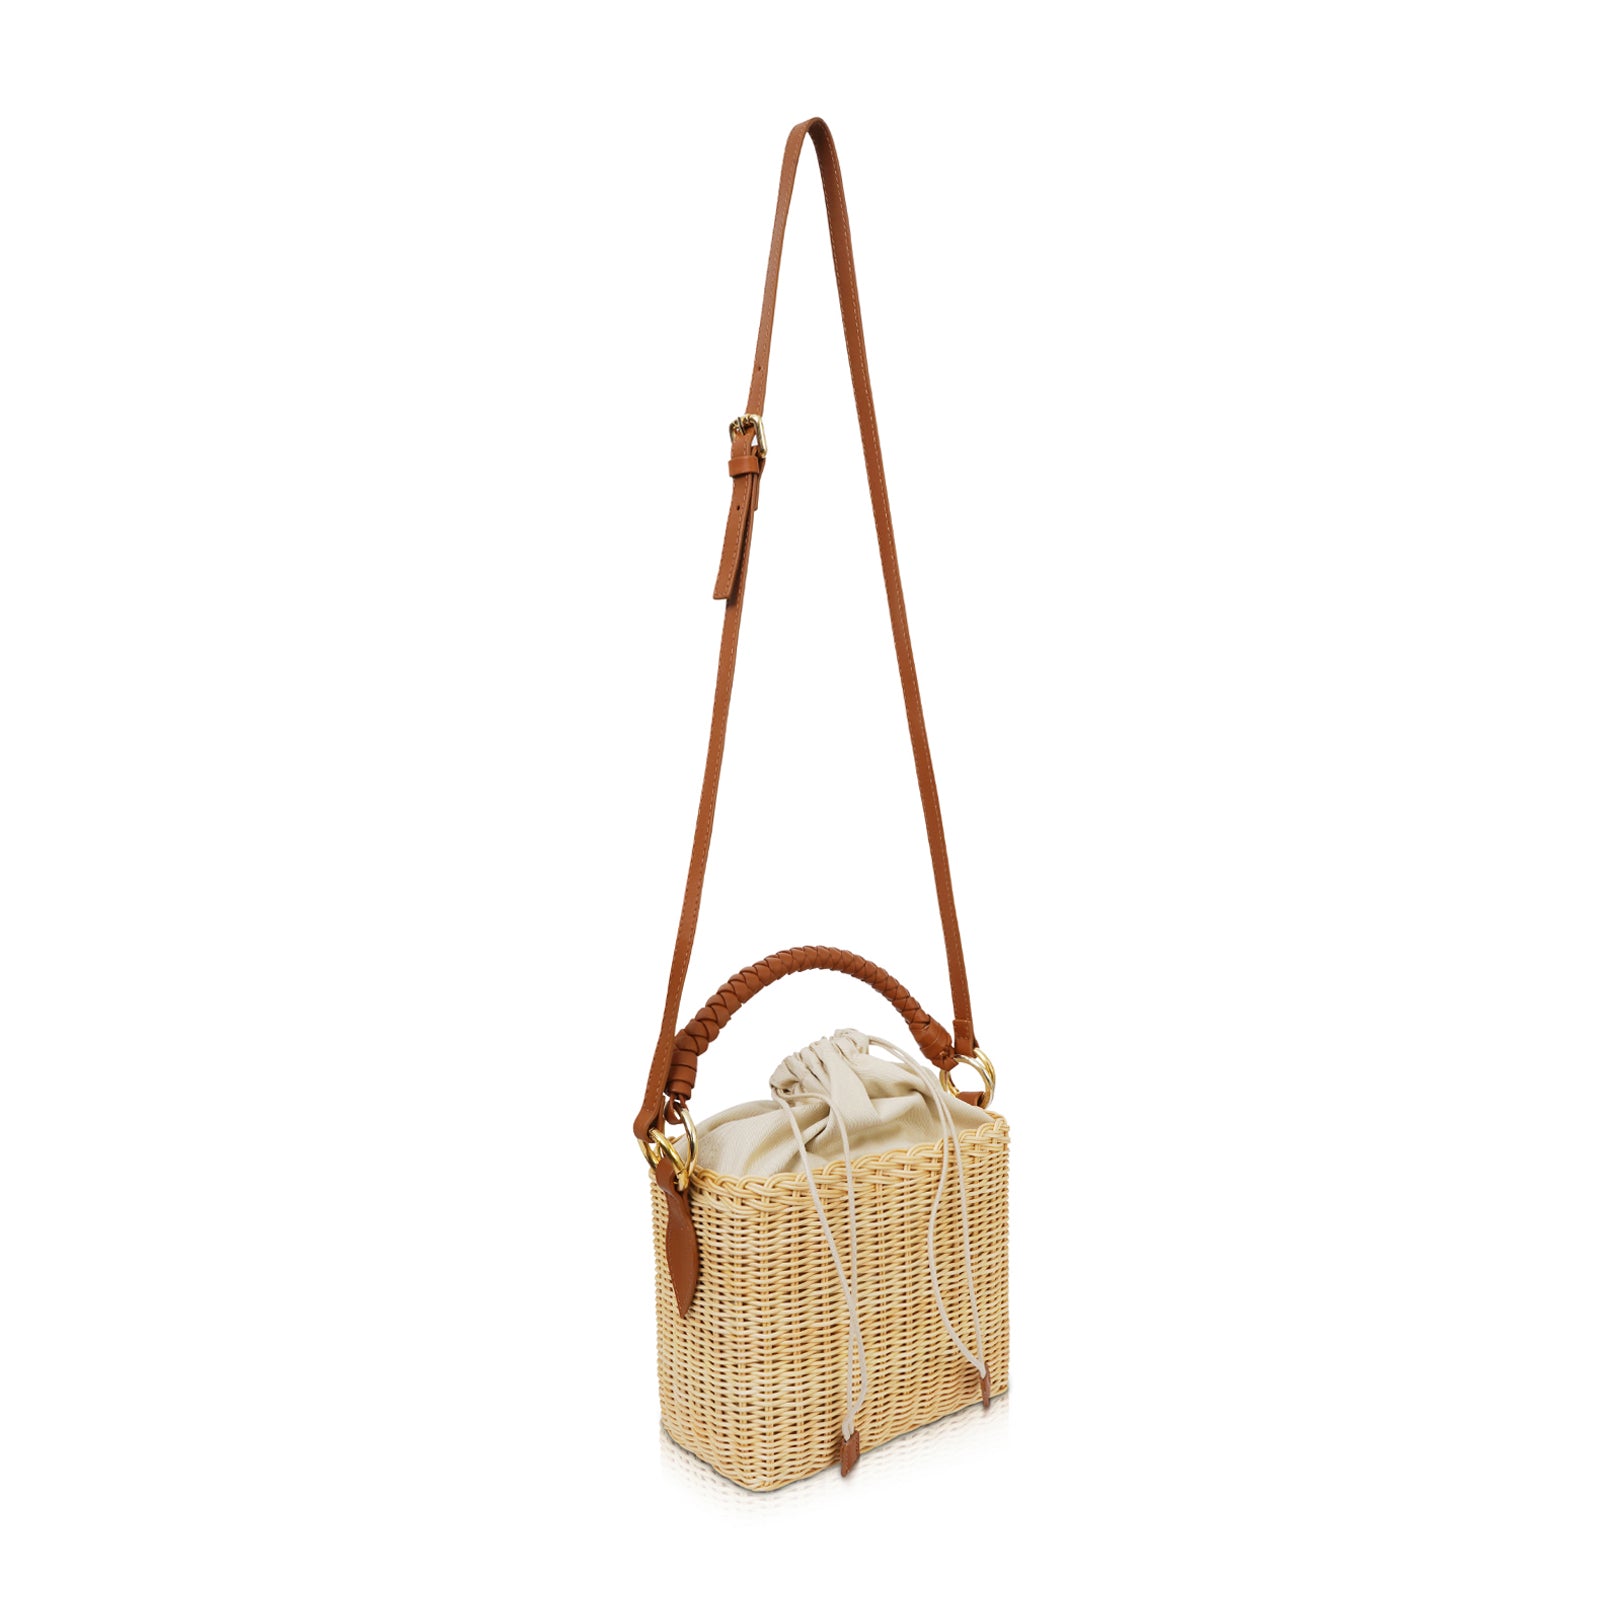 meli melo - Santina bucket bag in tan - recreating a woven basket 🧺 feel  in our signature 🇮🇹 leather • shop it in tan, black and dark tan